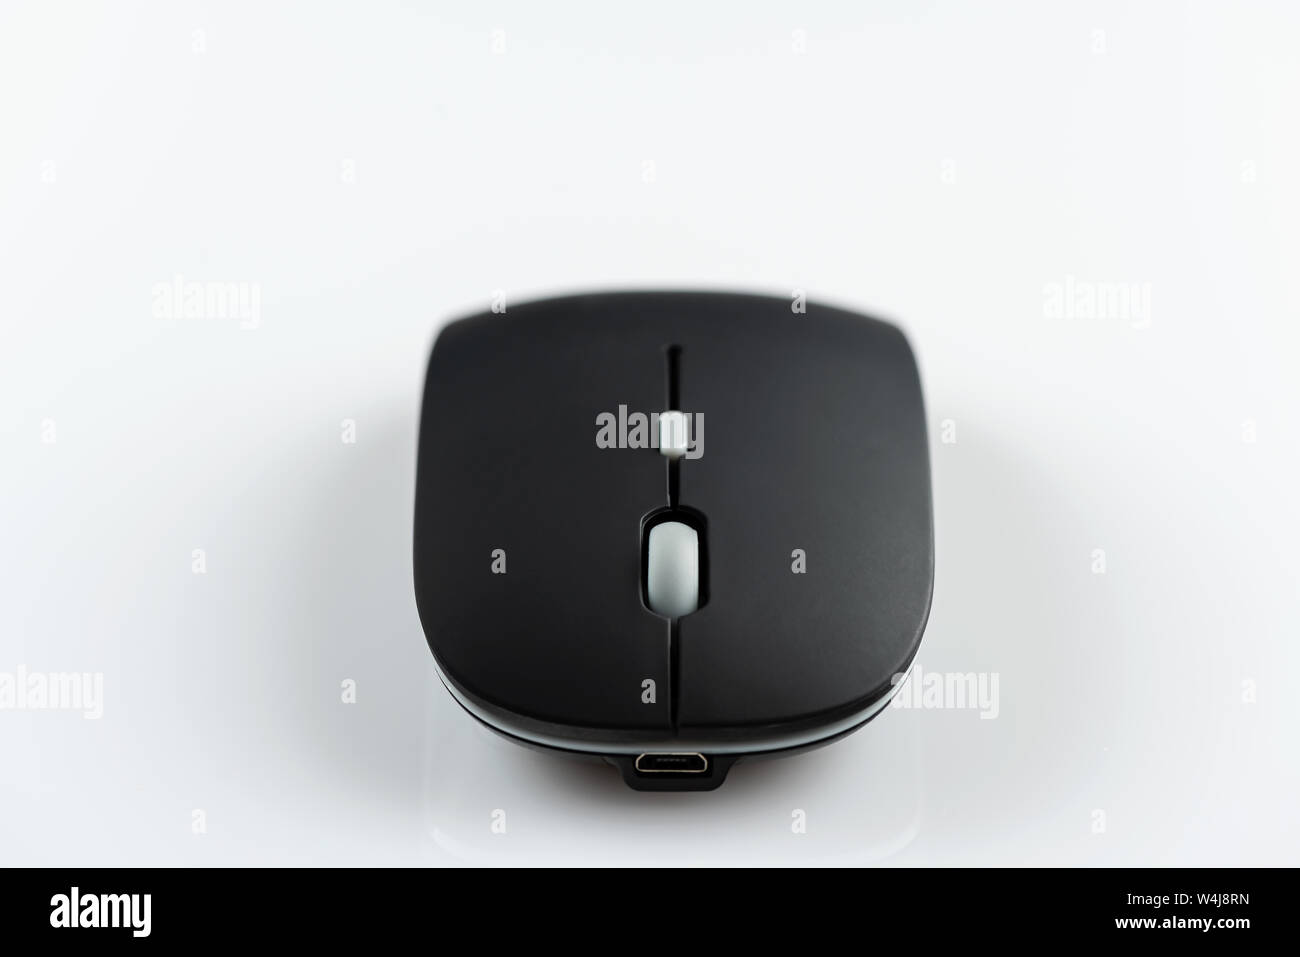 Black wireless computer mouse on a white background. Stock Photo